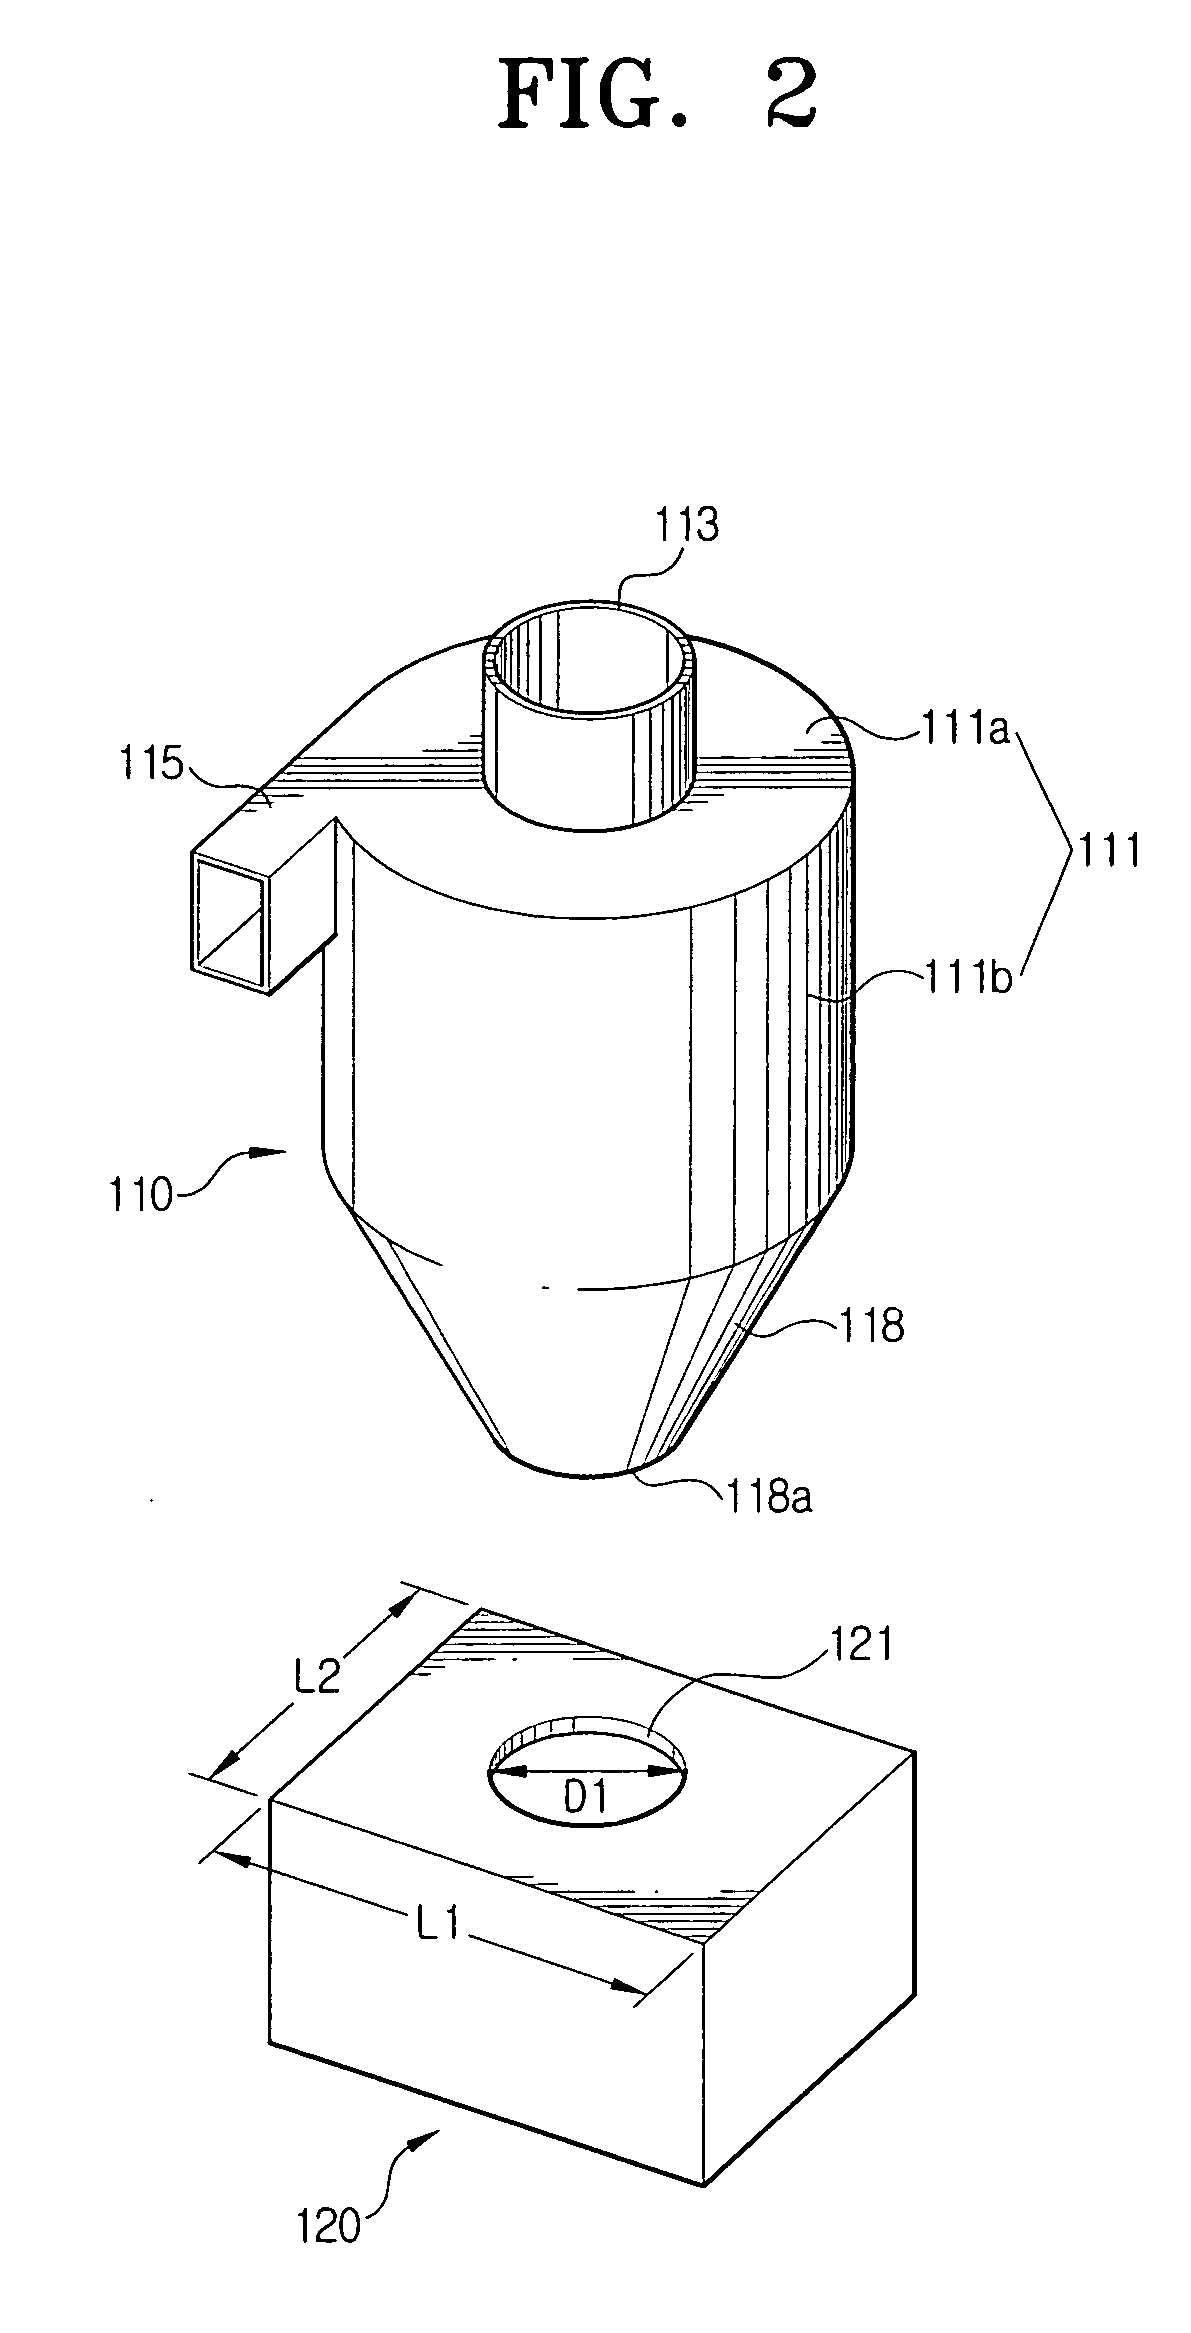 Dust collecting apparatus for a vacuum cleaner